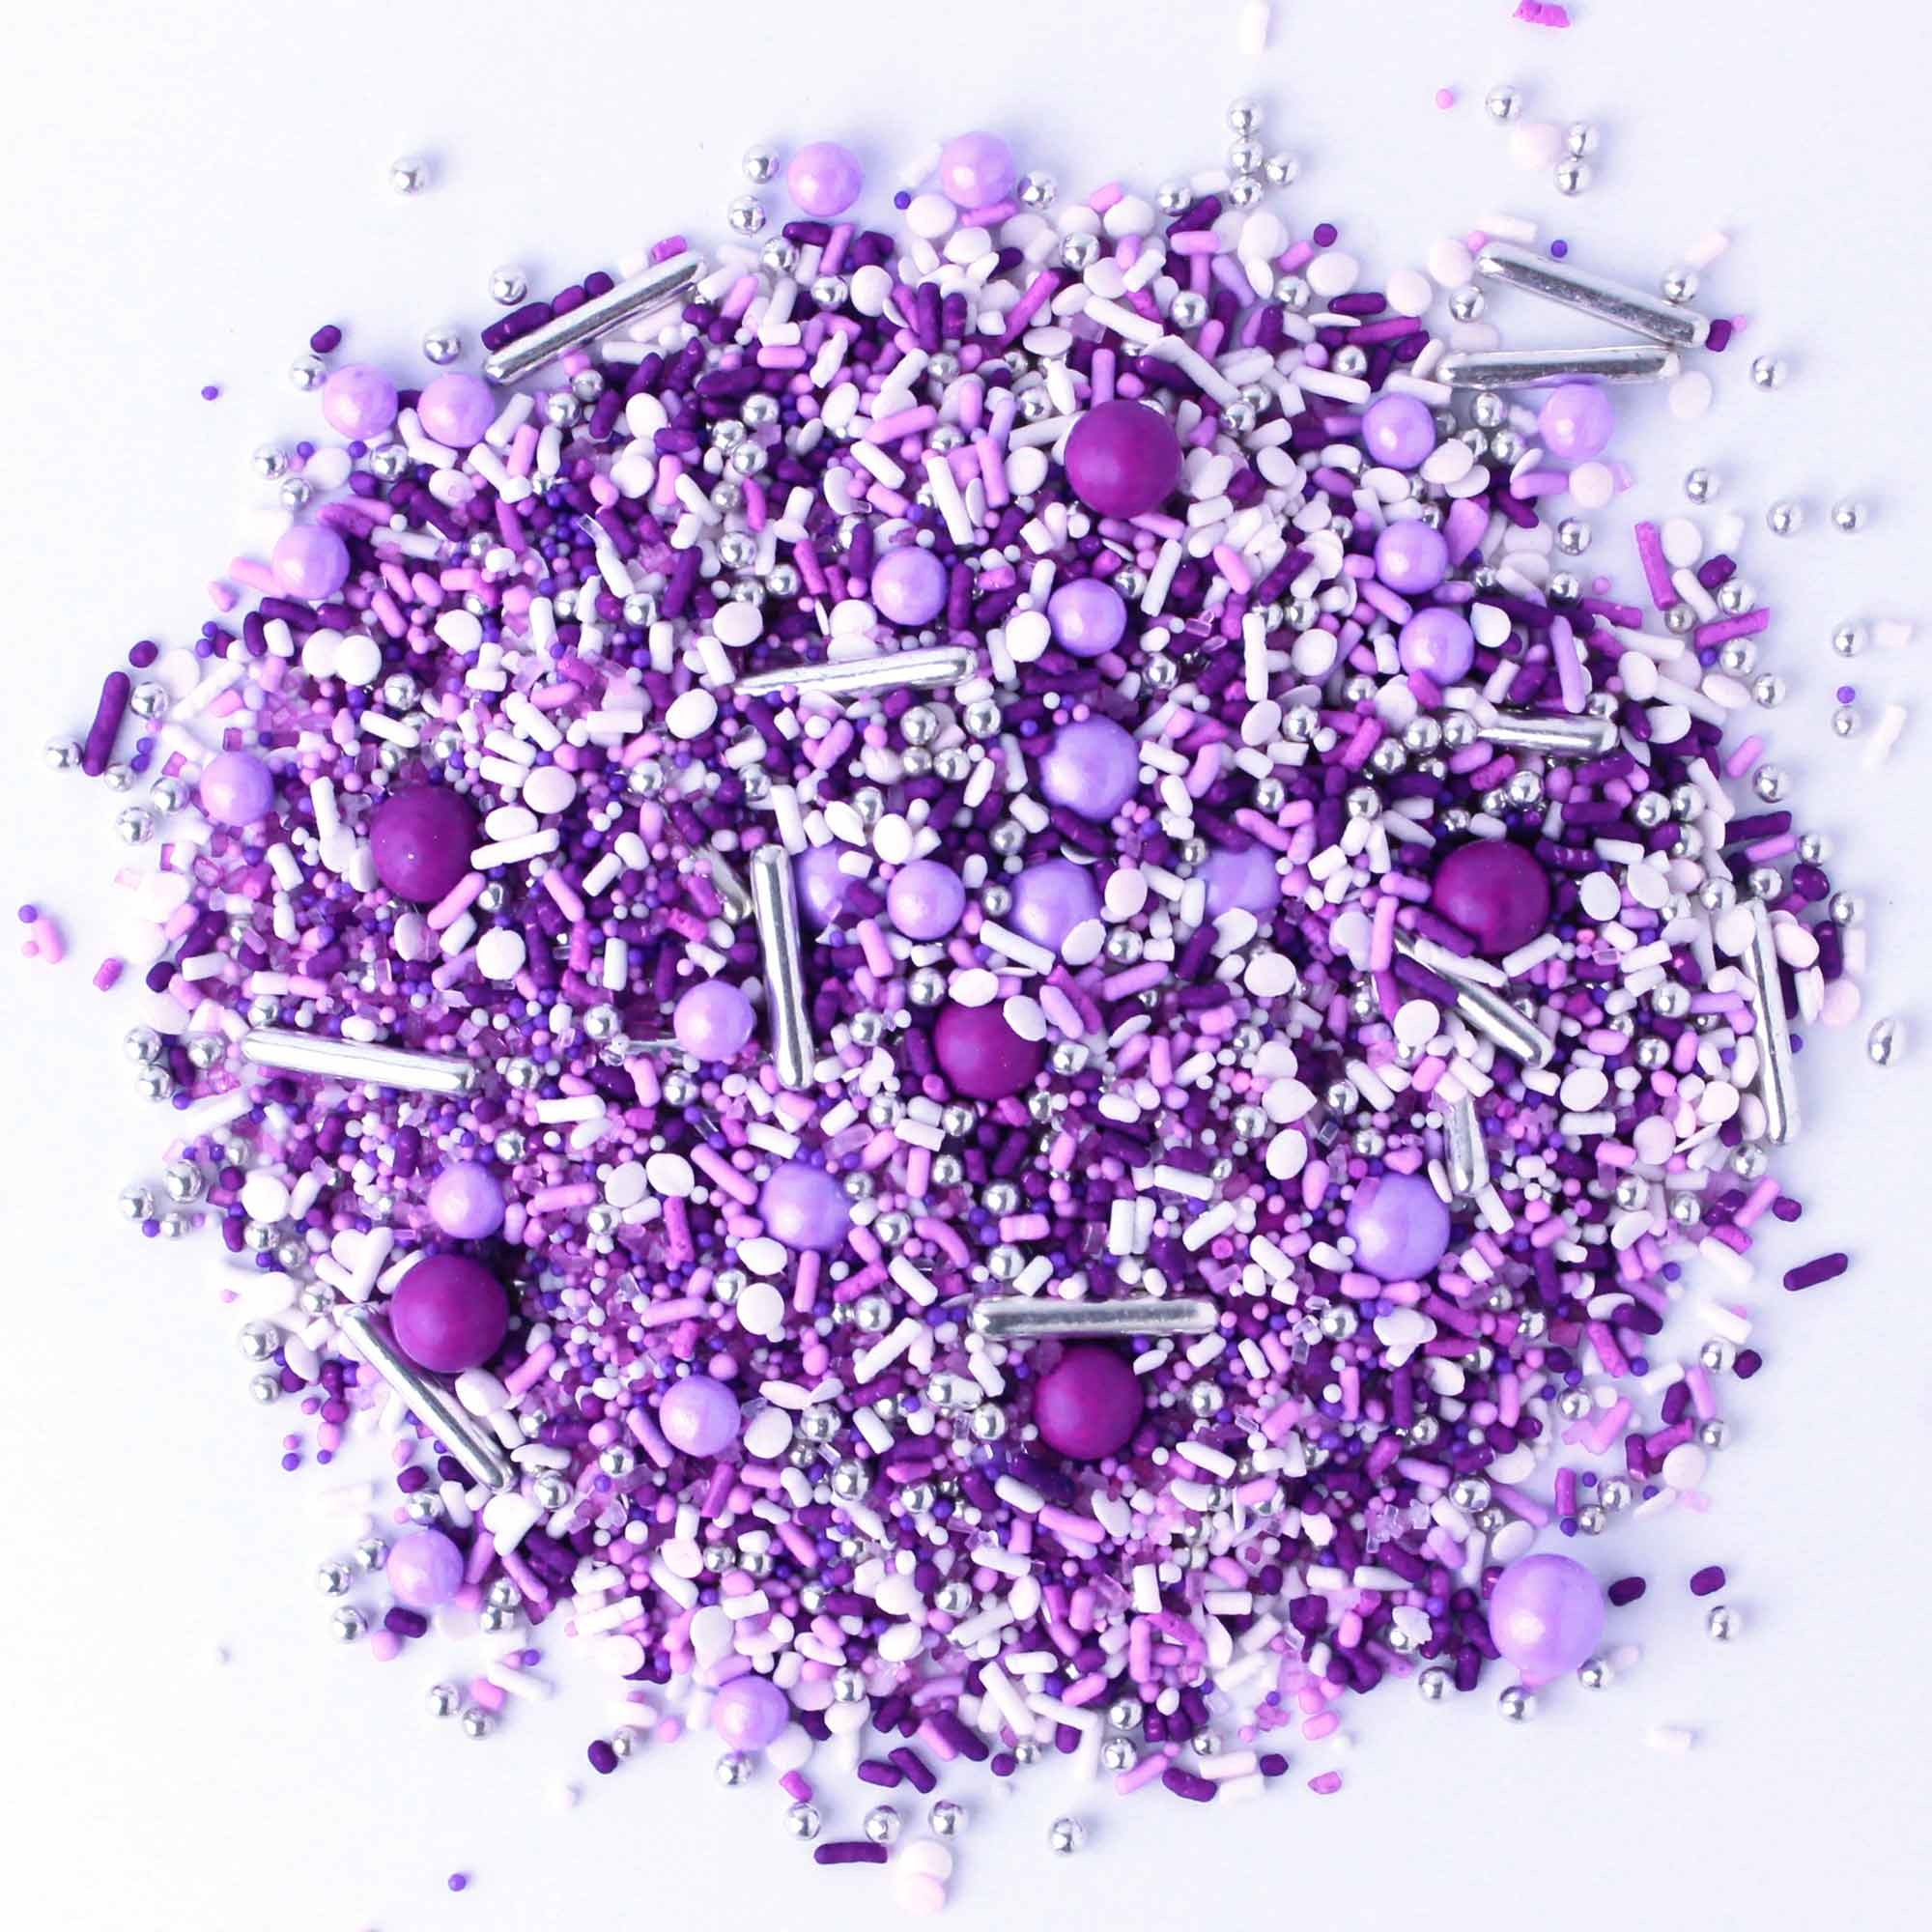 Perfectly Purple Sprinkle Mix 2 Ounces by Sprinkle Pop Fancy Cake